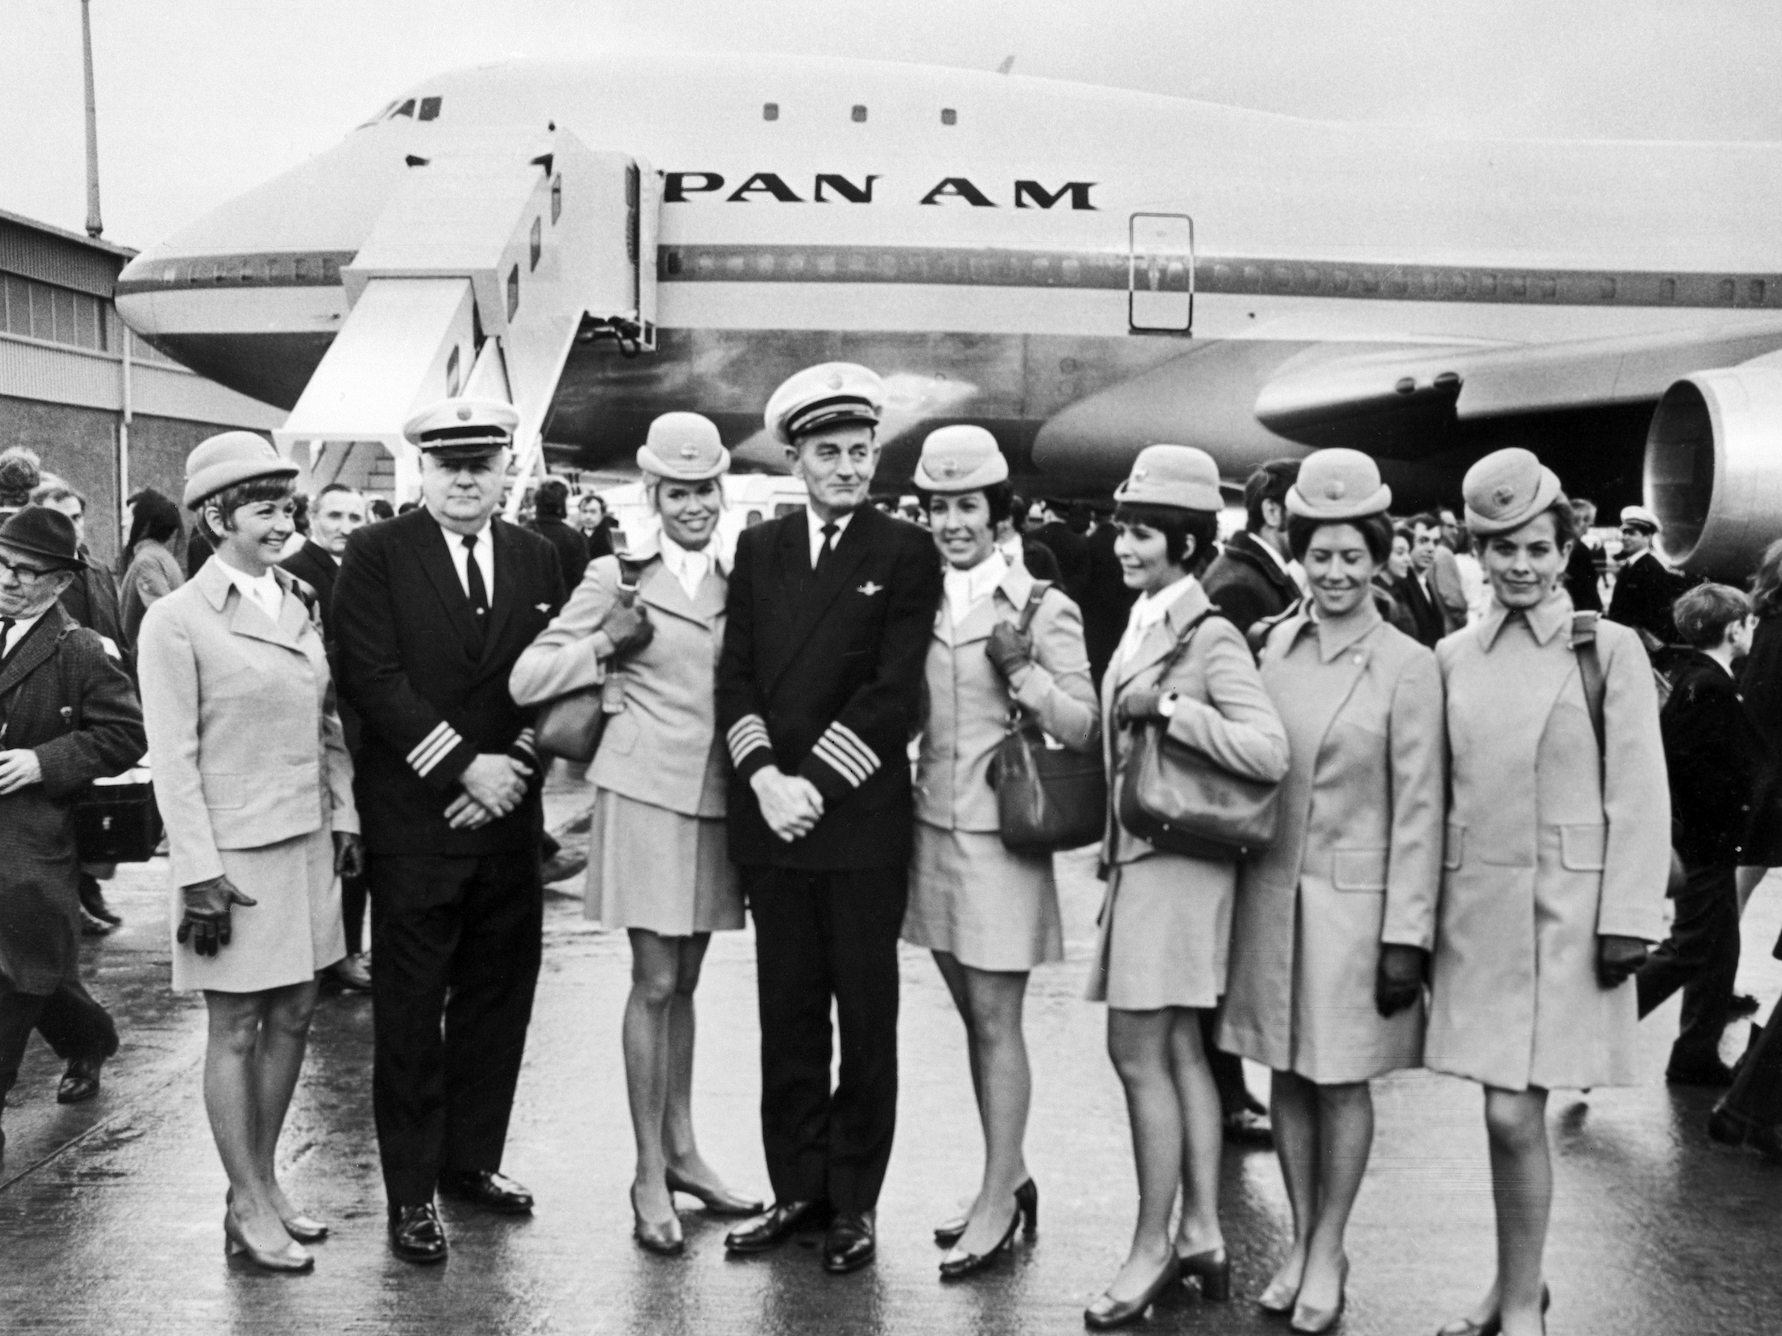 The flight crew after the first Pan Am 747 flight from New York to London Heathrow in 1970.